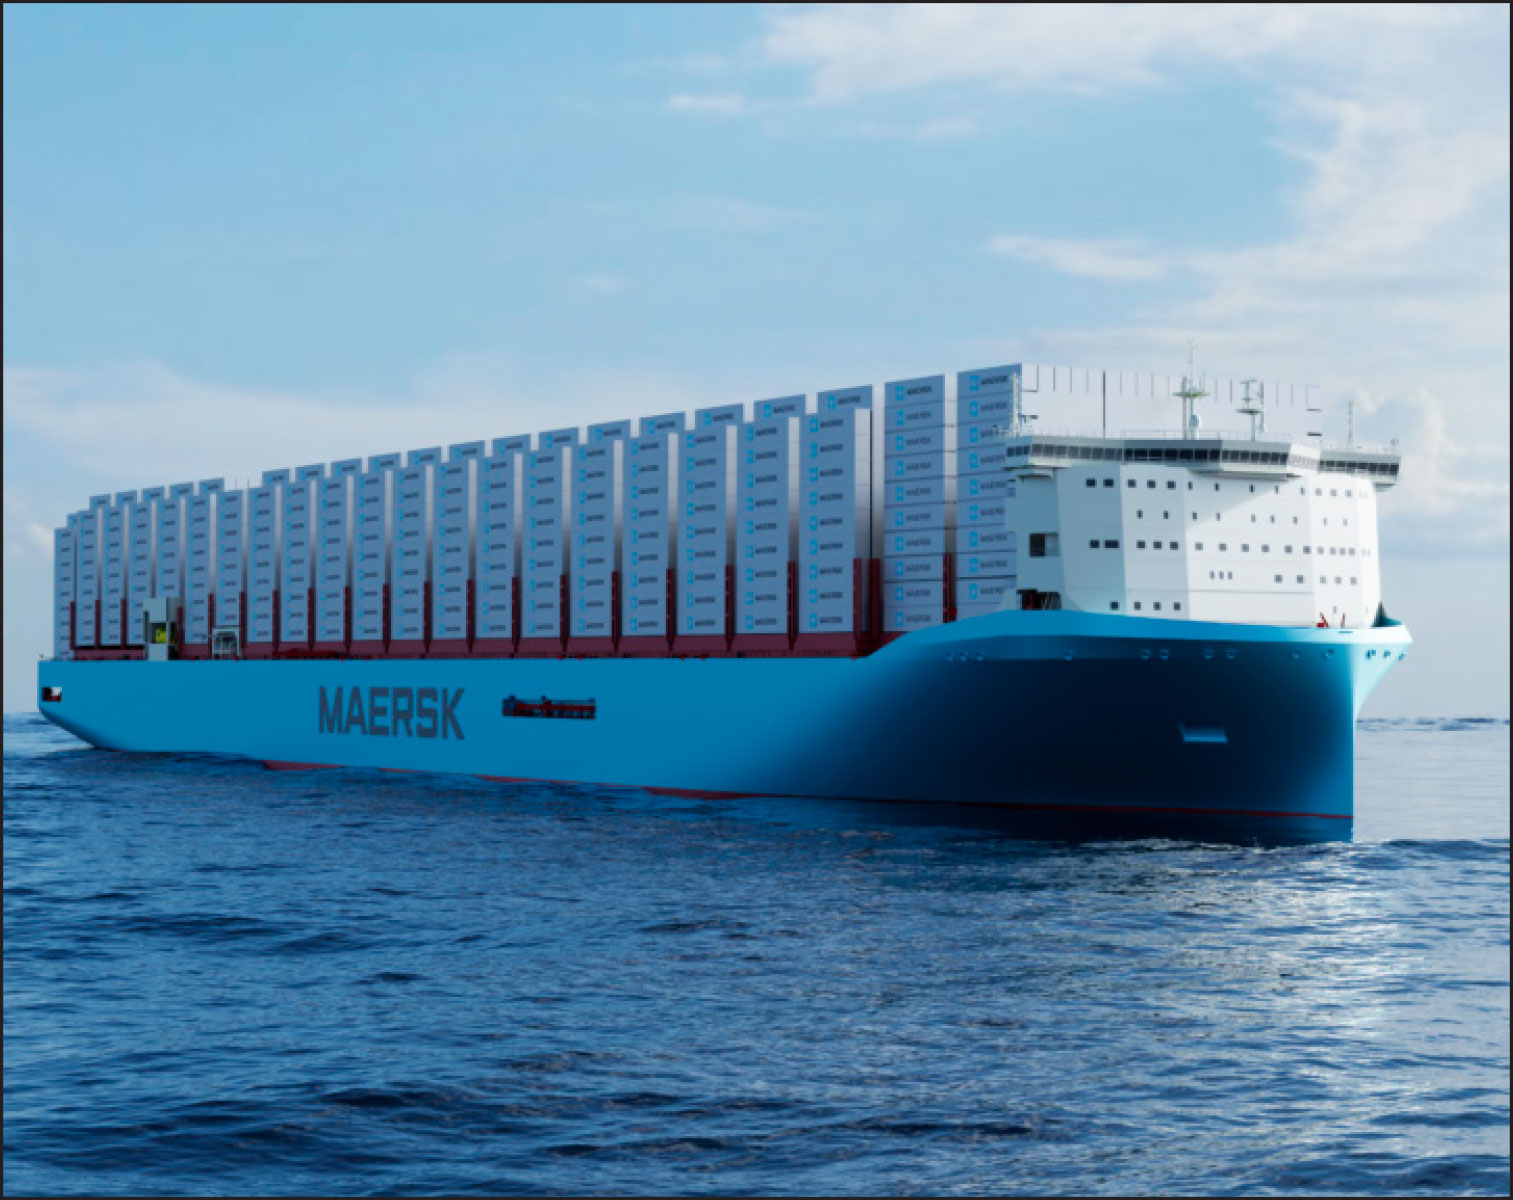 World’s first green container ship The world’s first ‘green container ship’ fuelled by methane from food waste and landfill waste has docked in Felixstowe, England. Maersk, the logistics company behind the success of this ship, has 24 additional methanol-powered ships scheduled for delivery by 2027 as part of its commitment to achieving net zero emissions by 2040. 